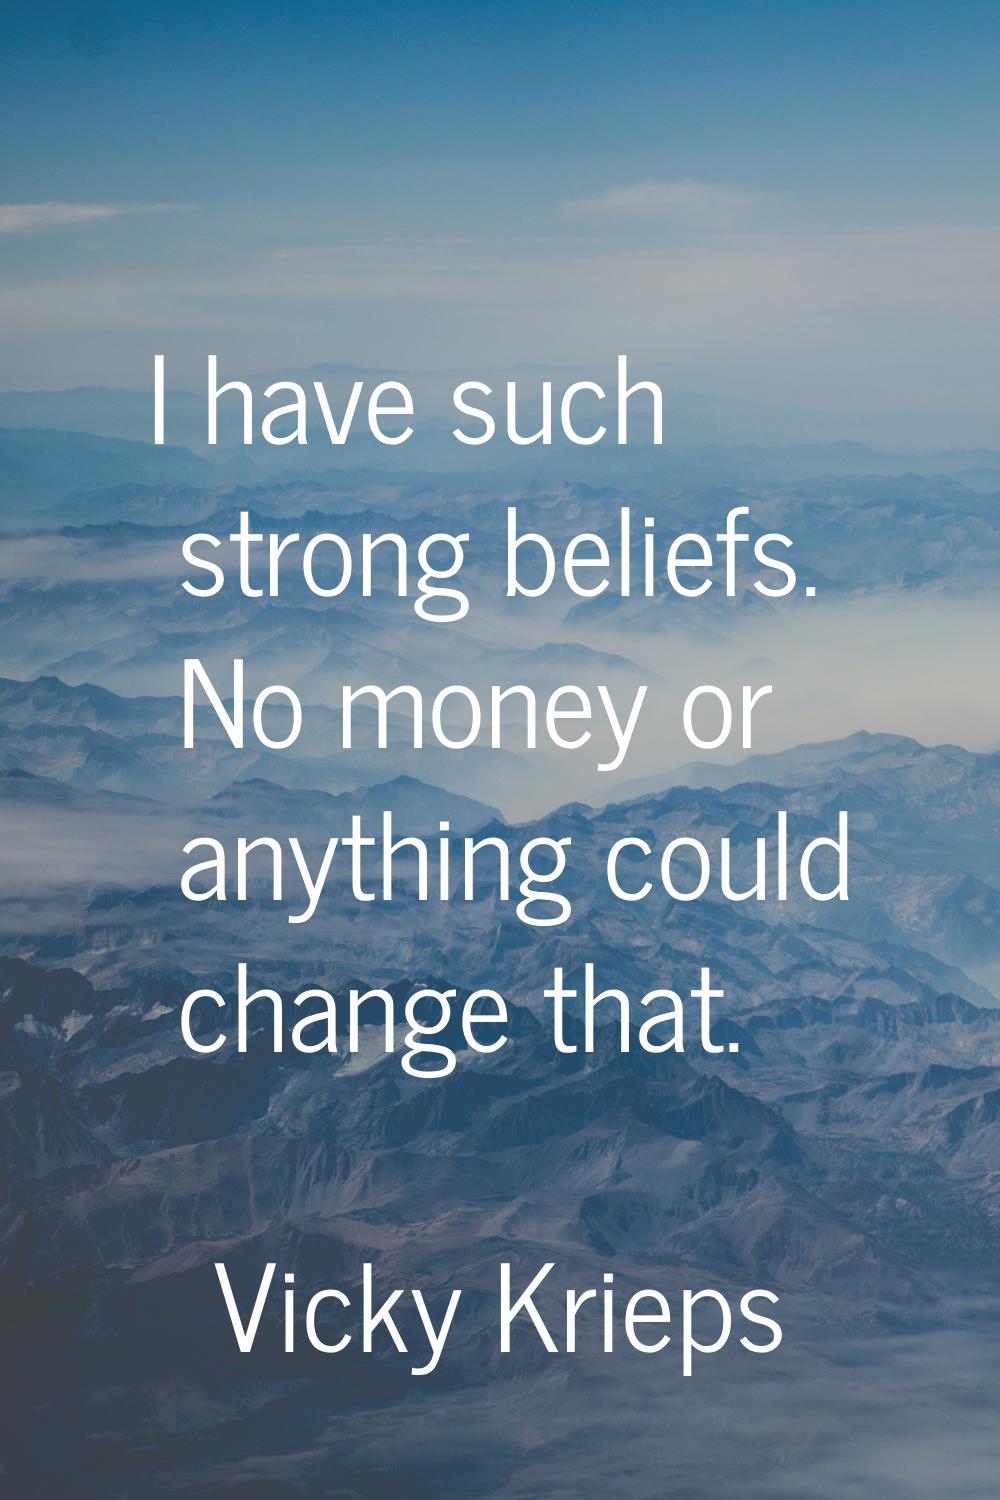 I have such strong beliefs. No money or anything could change that.